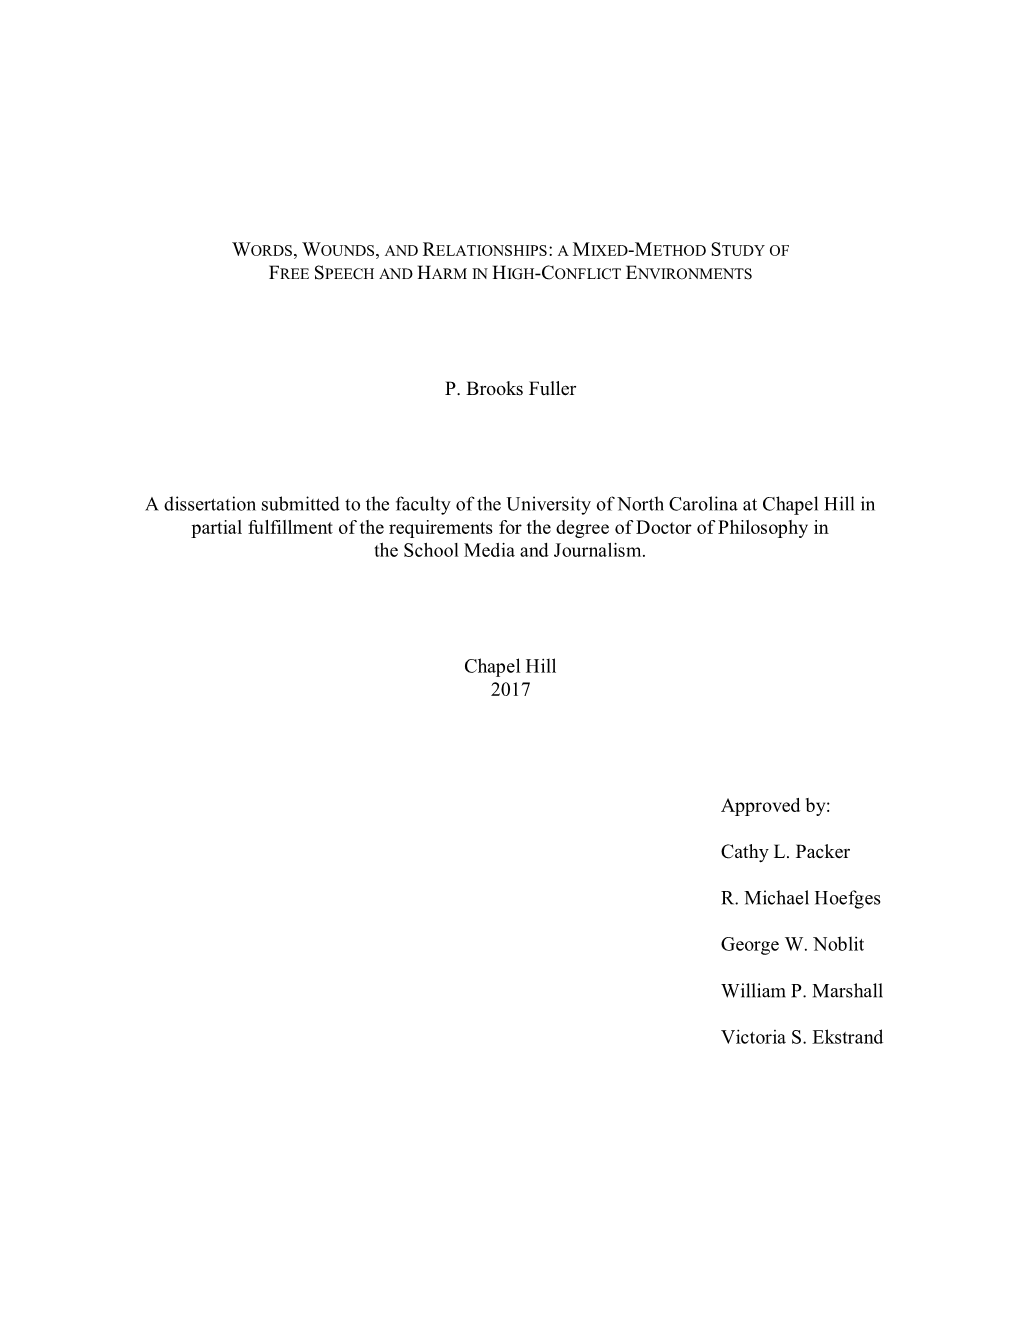 P. Brooks Fuller a Dissertation Submitted to the Faculty of The